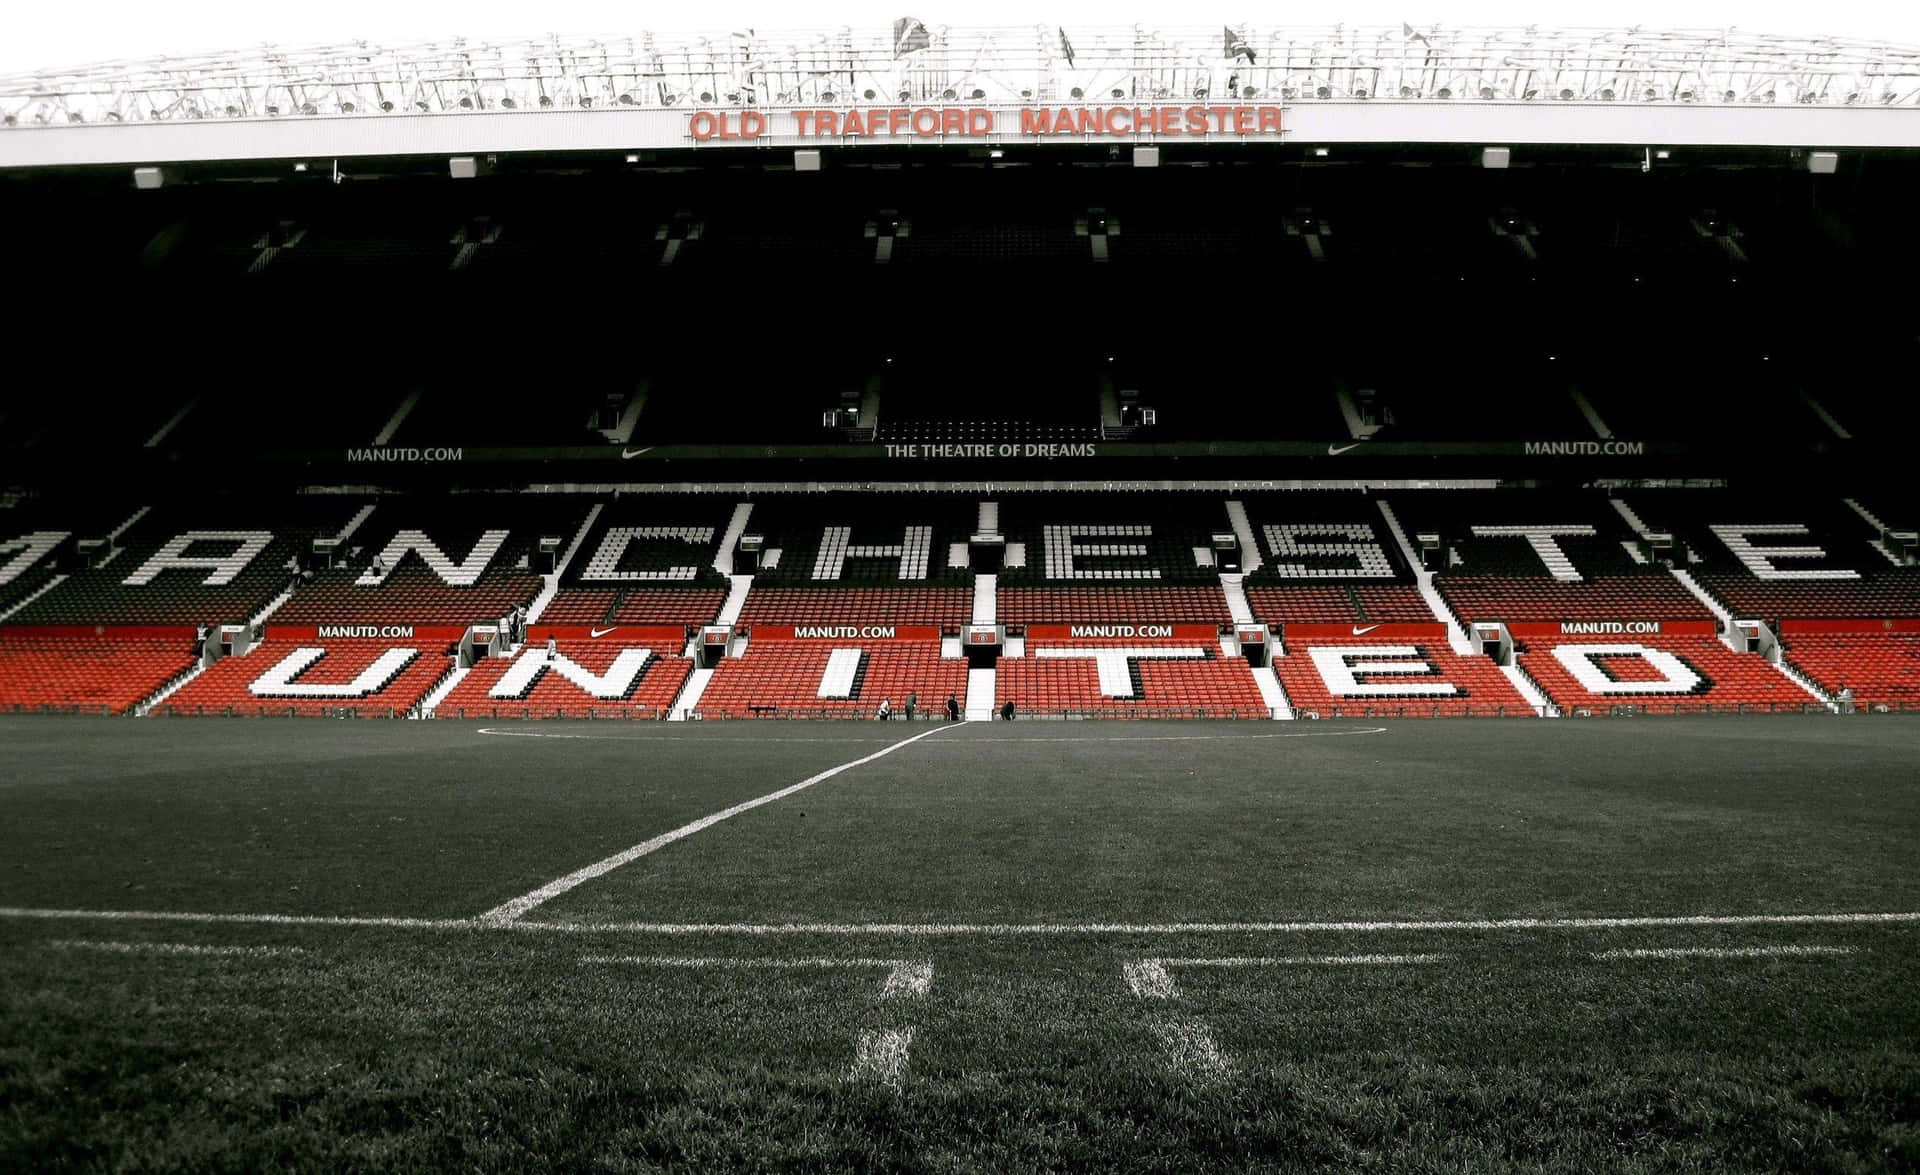 Old Trafford Stadium Manchester United Seating Wallpaper